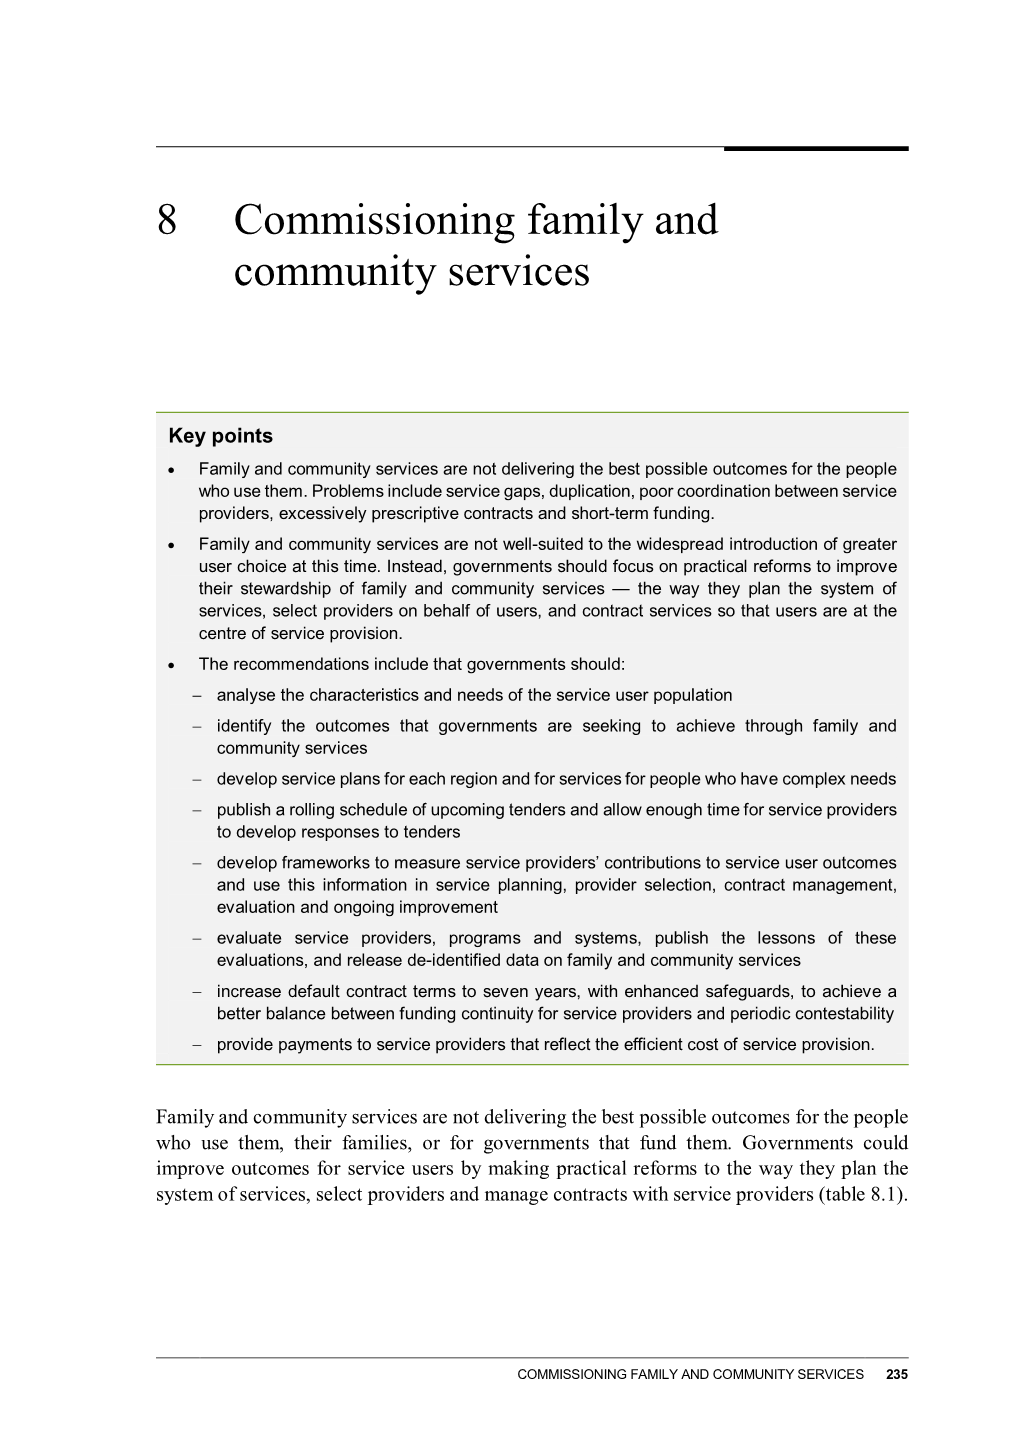 Family and Community Services